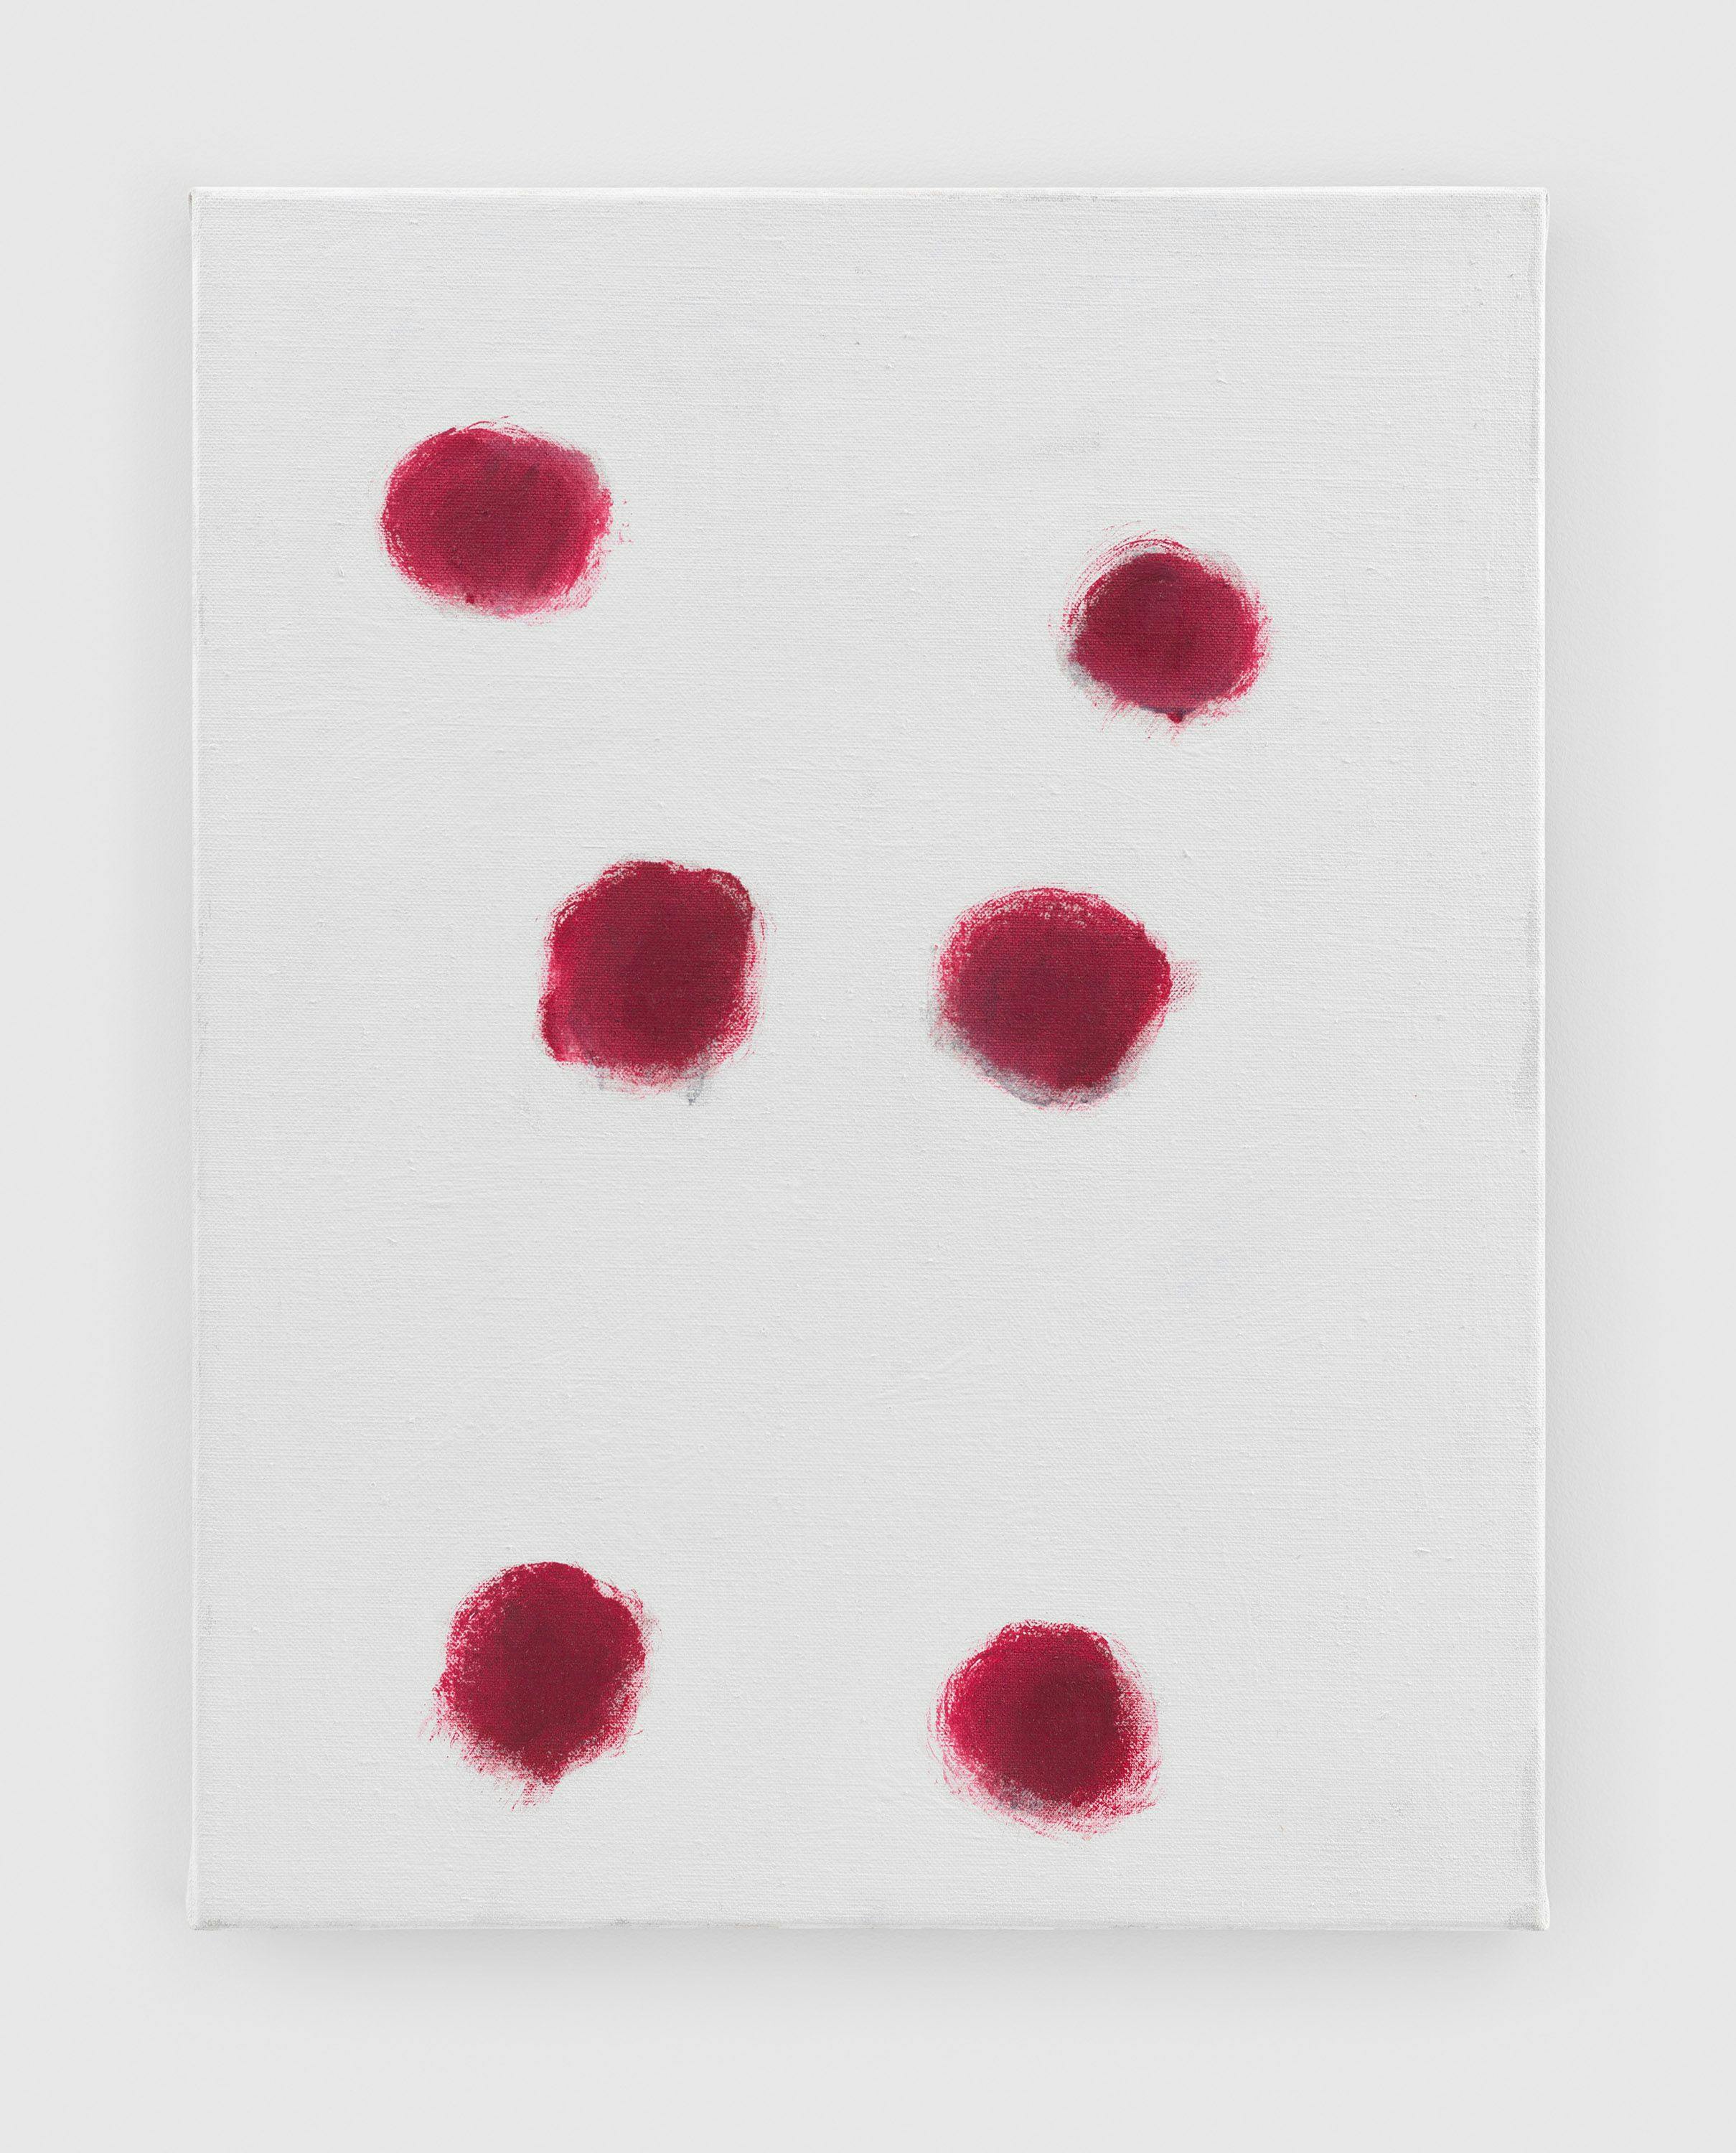 A painting by Raoul De Keyser, titled The Failed Juggle, dated 2010.